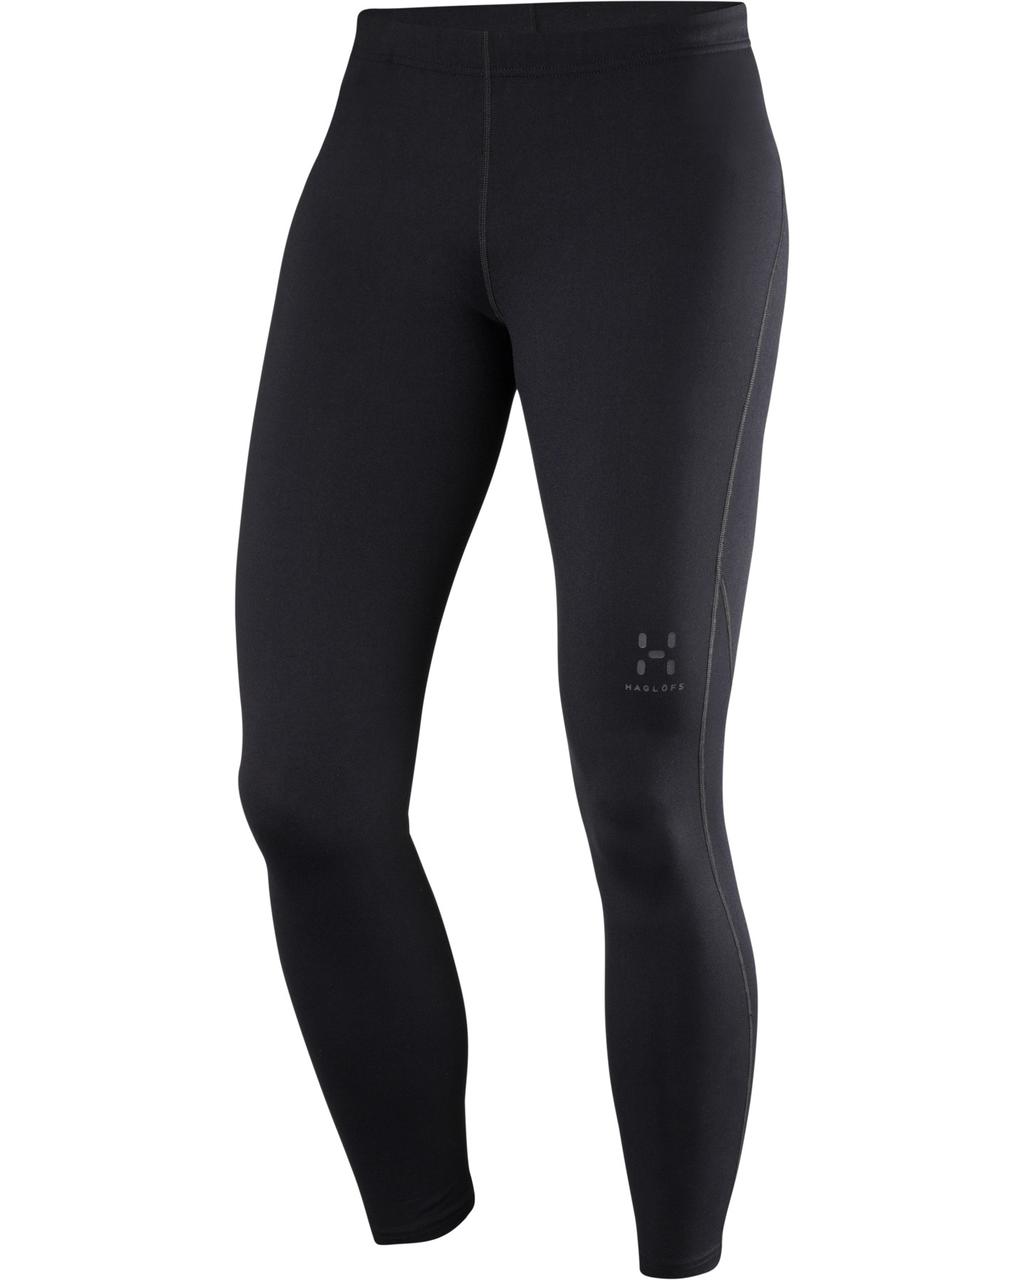 INTENSE CORE TIGHT/ INTENSE Q CORE TIGHT This minimal piece is ergonomically designed for unrestricted movement, with excellent moisture-management capabilities for pulse-pounding activities.